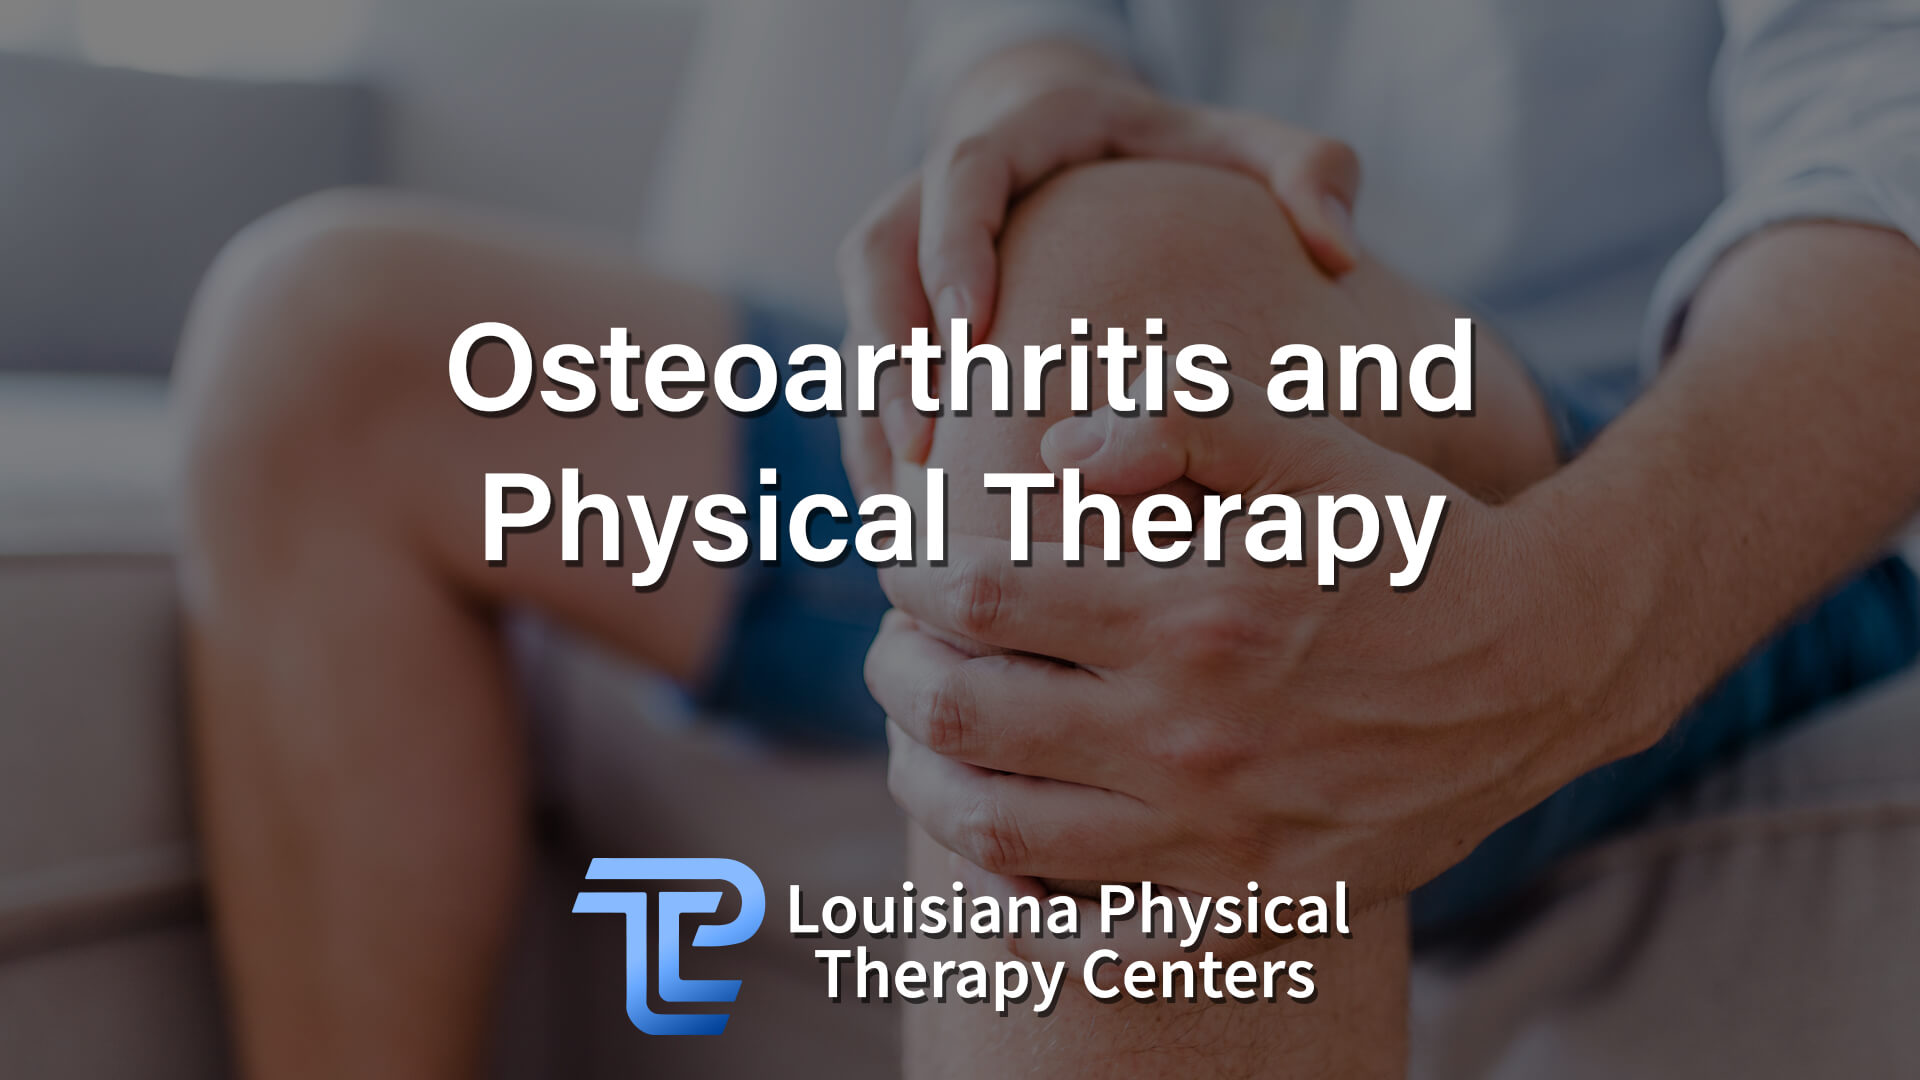 Osteoarthritis and Physical Therapy